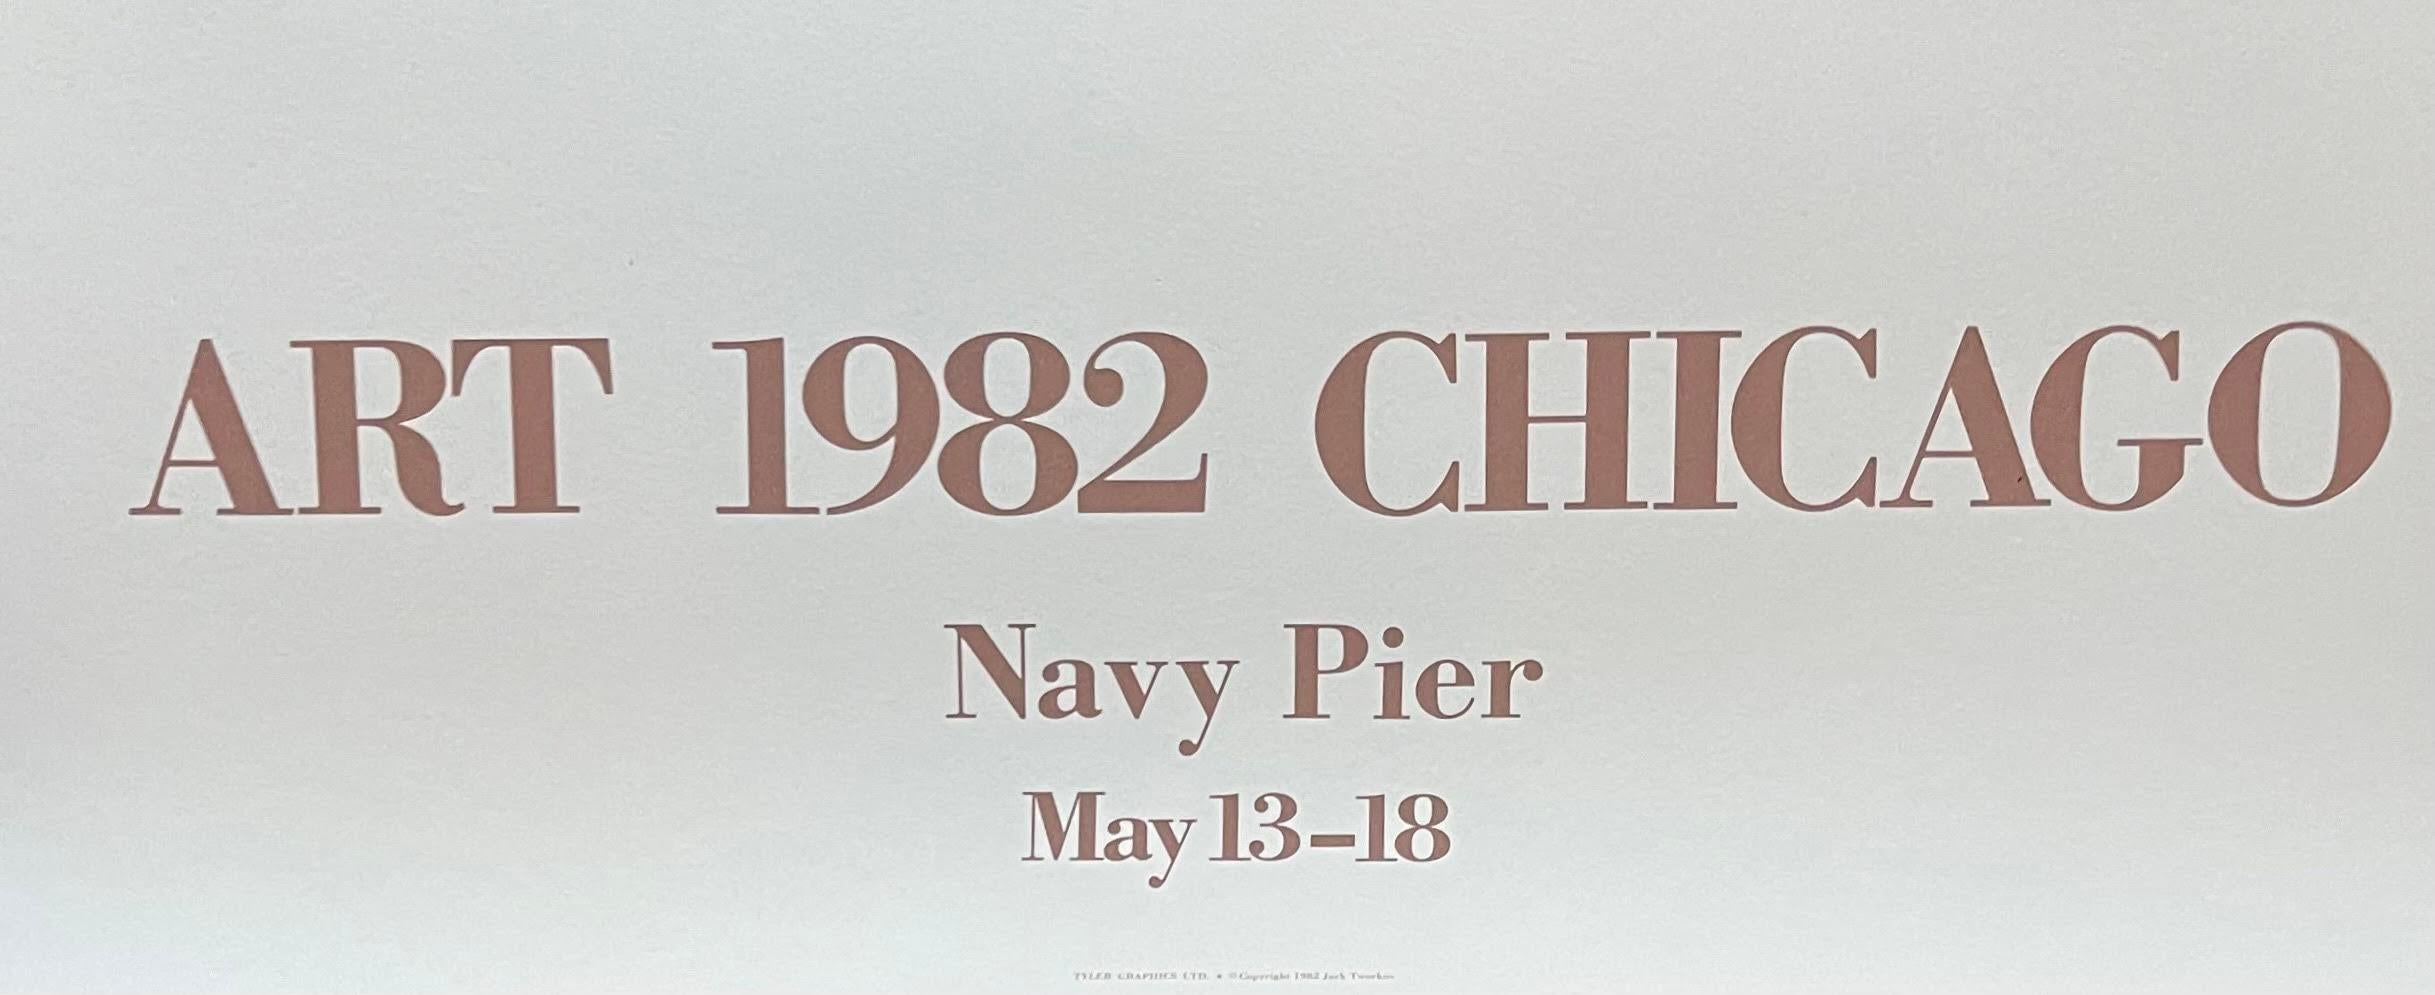 Limited Edition Art 1982 Chicago Navy Pier Abstract Poster geometric abstraction For Sale 1